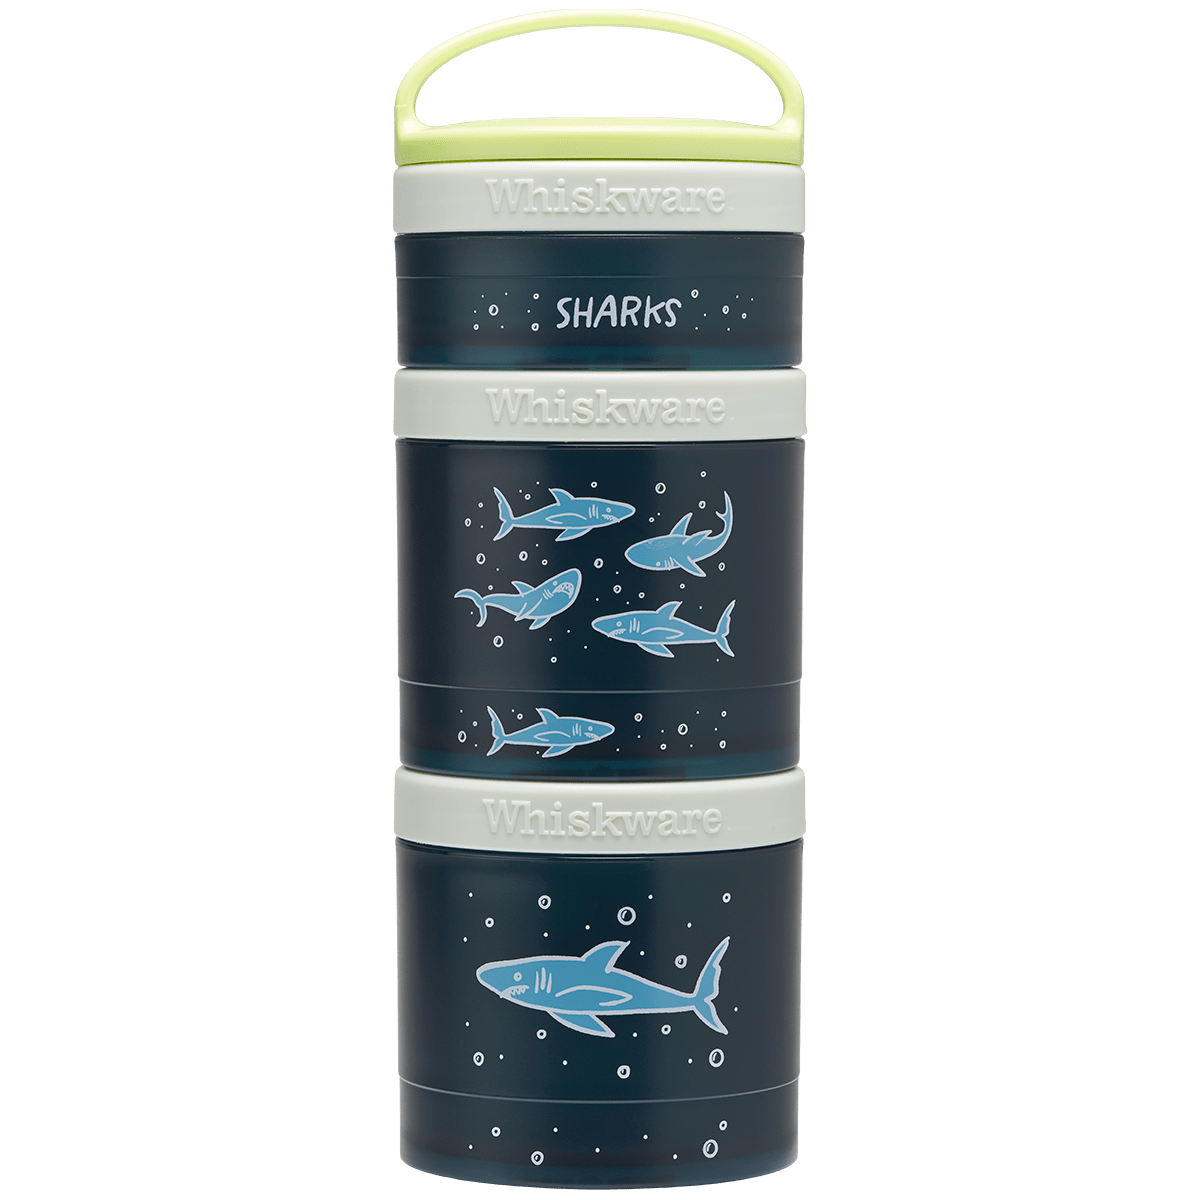 Whiskware Animal Snack Containers Shark